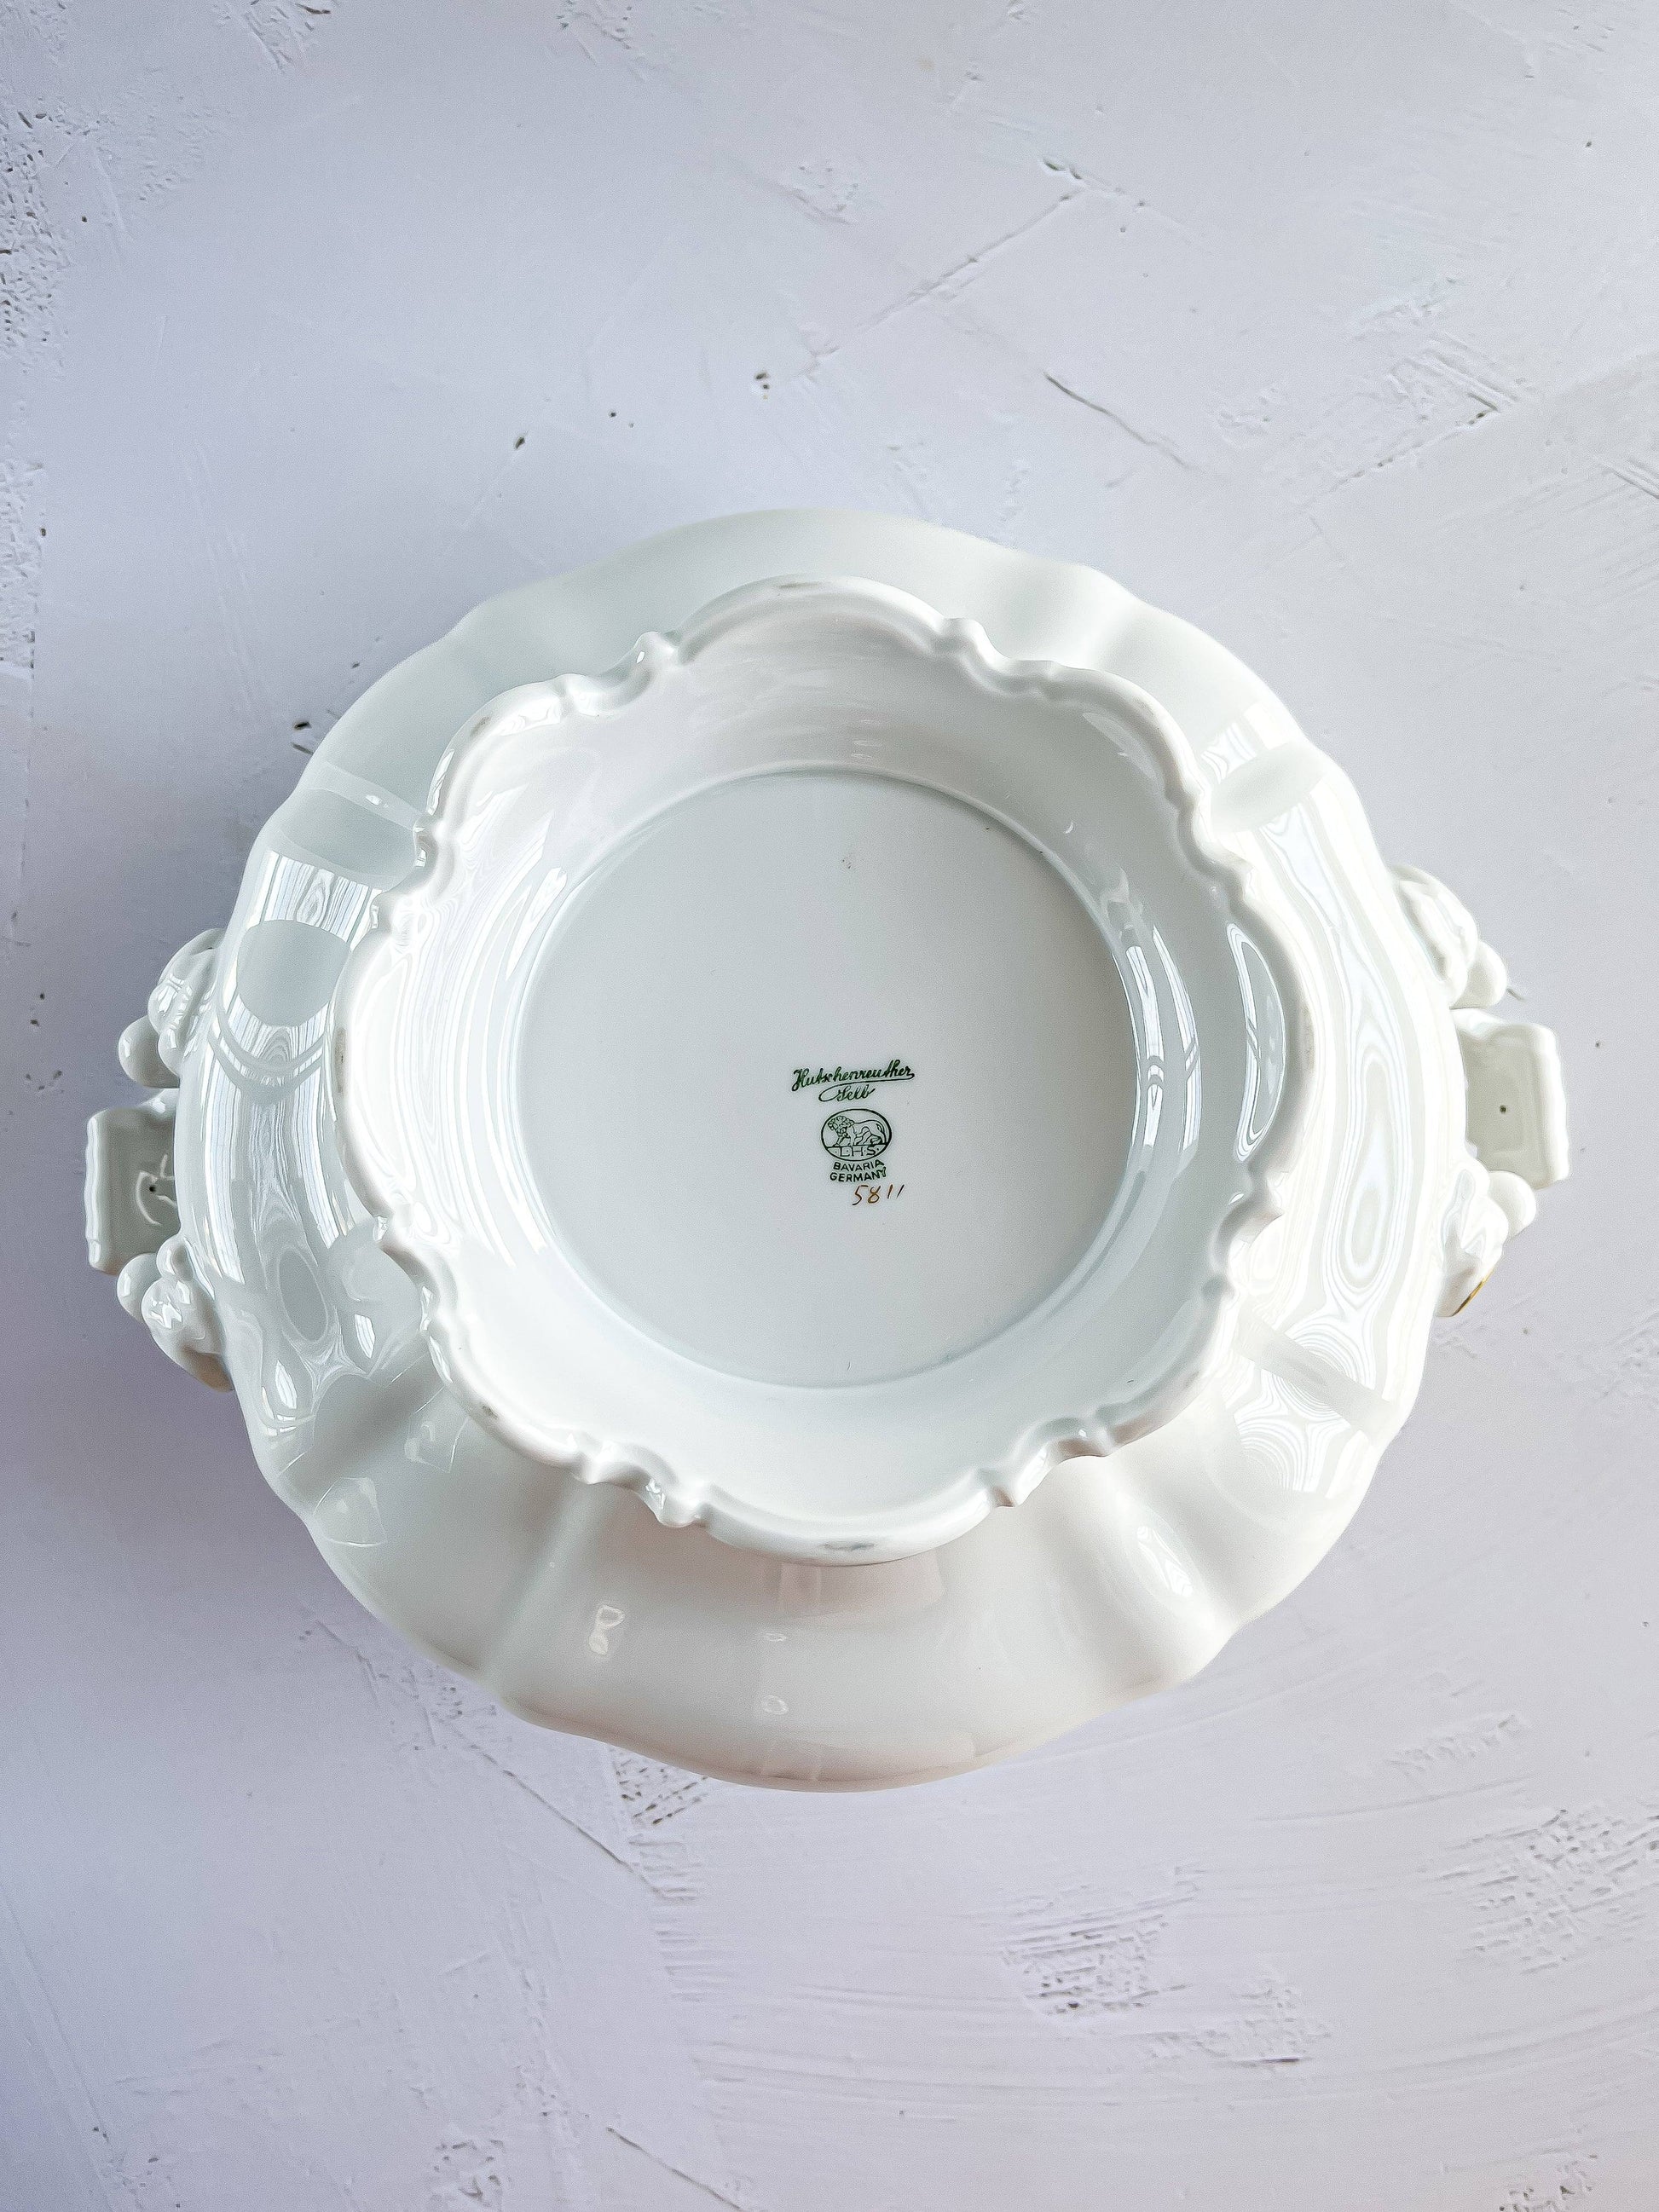 Hutschenreuther Round Covered Vegetable Dish - 'Brighton' Collection - SOSC Home